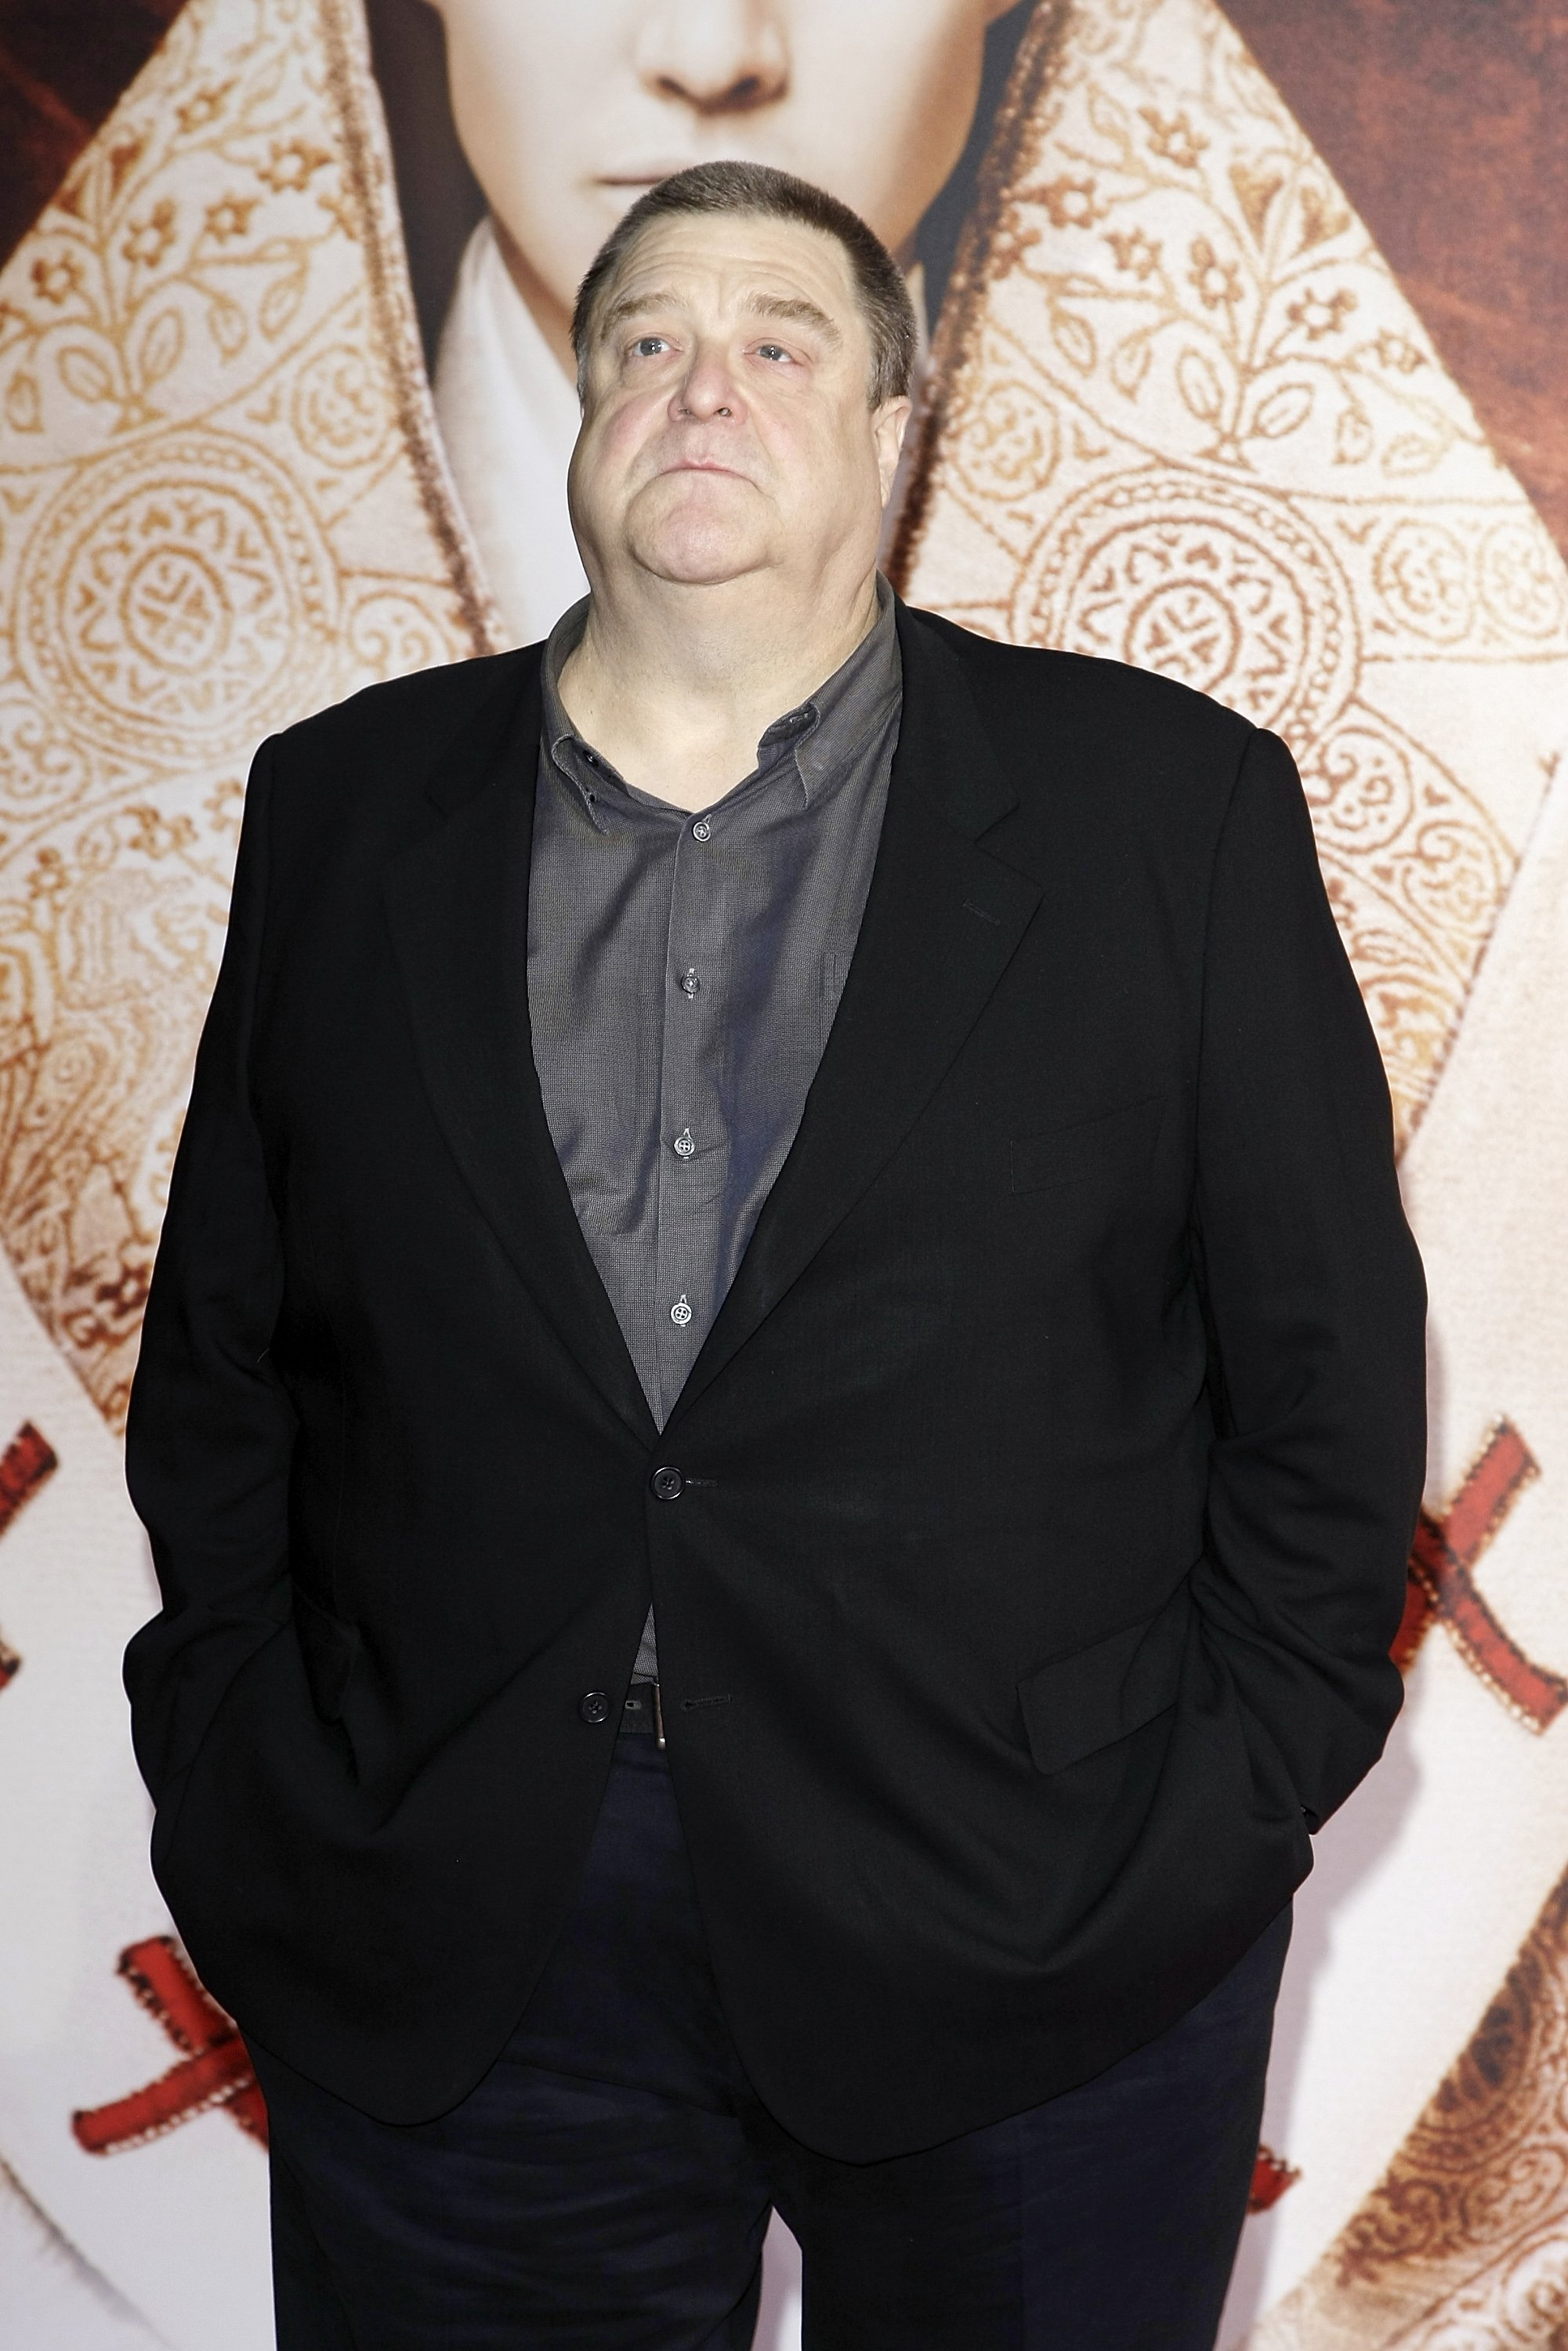 John Goodman at the premiere of "Pope Joan" on October 19, 2009 | Source: Getty Images